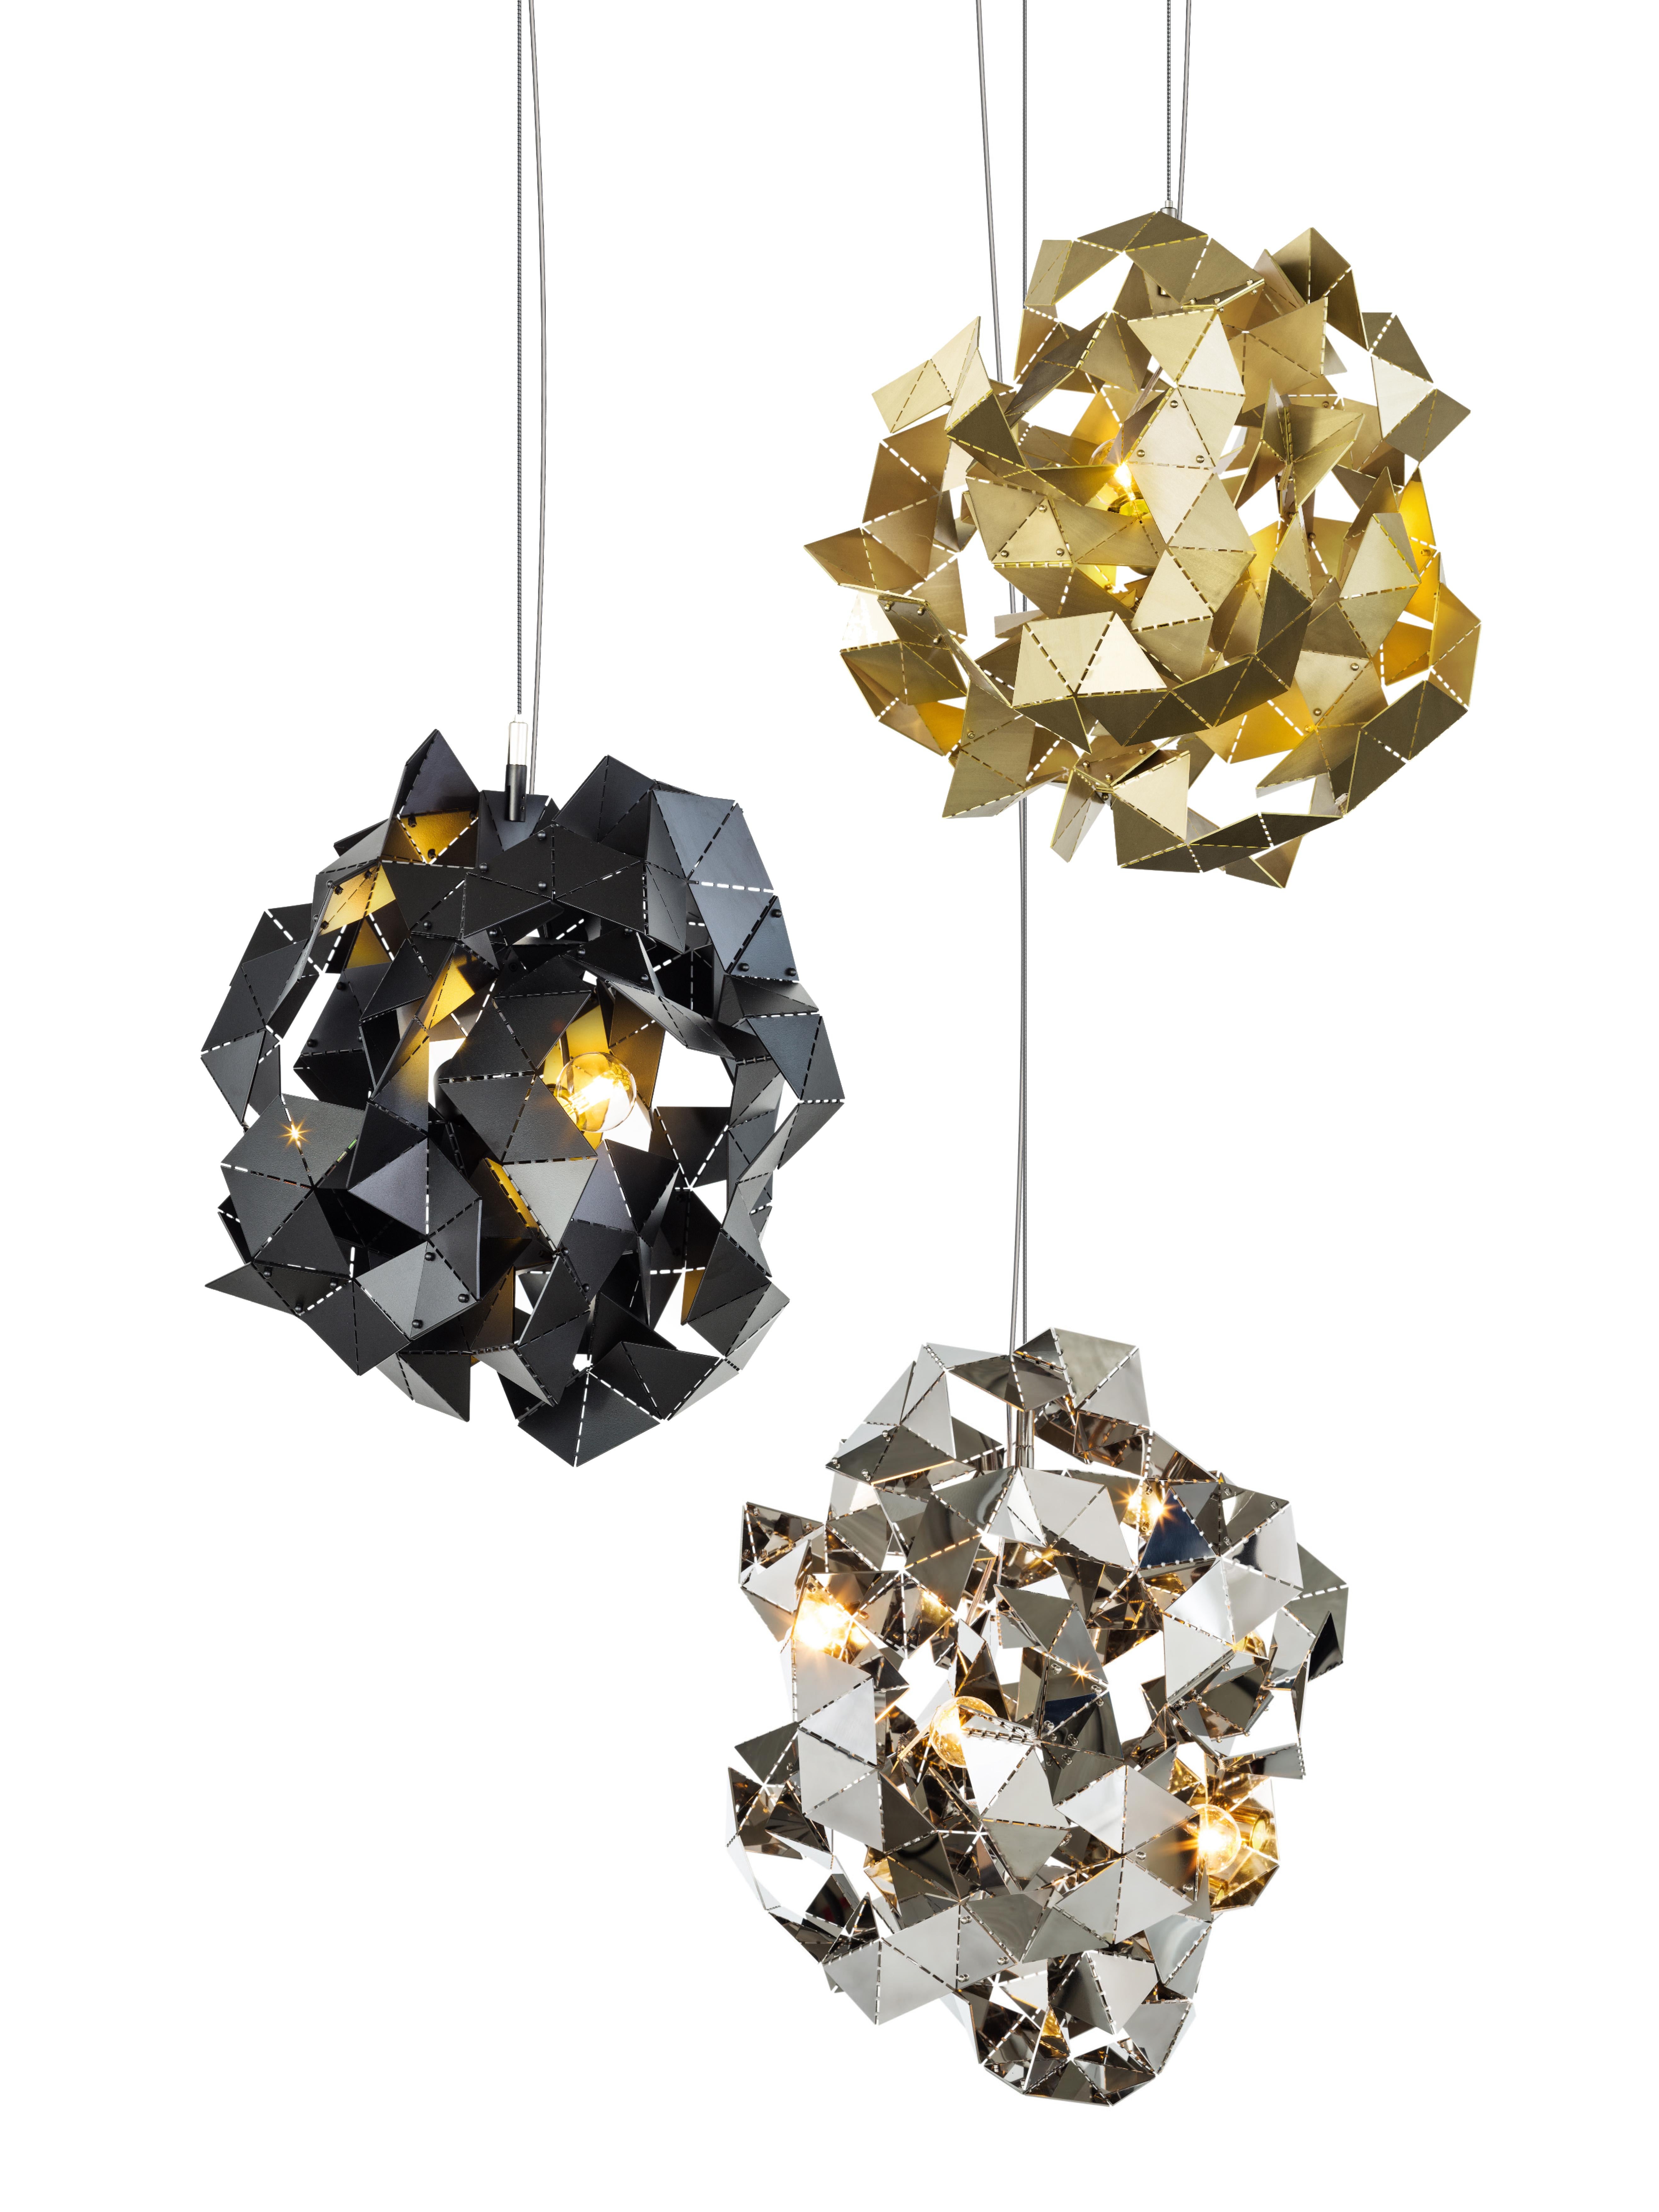 The Fractal Cloud, a modern pendant in black matt finish, is designed by William Brand, founder of Brand van Egmond. The play between the unexpected geometry of the surfaces and the characteristics of the metal changes the light from every point of